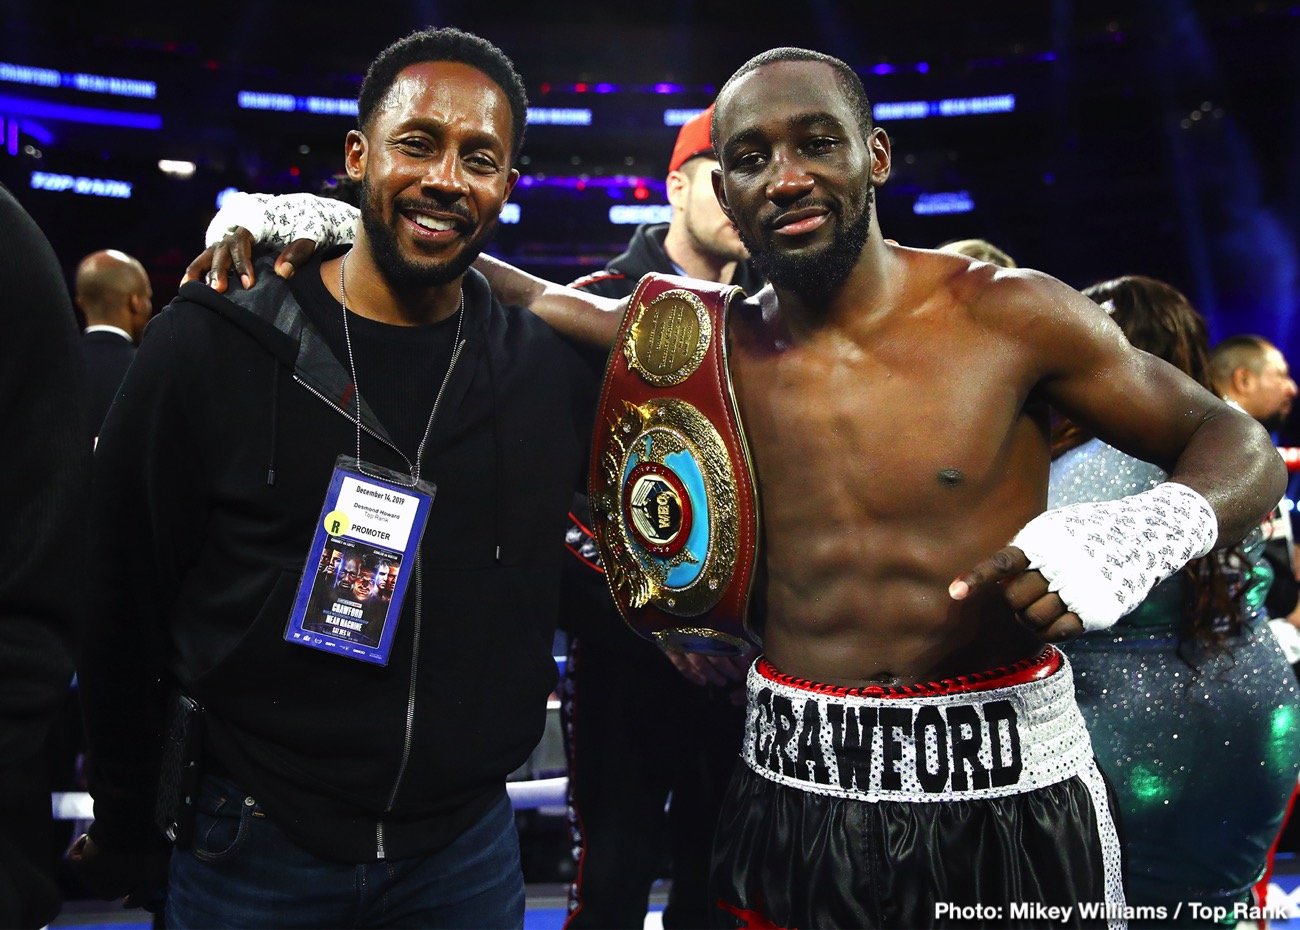 Danny Garcia, Terence Crawford boxing photo and news image